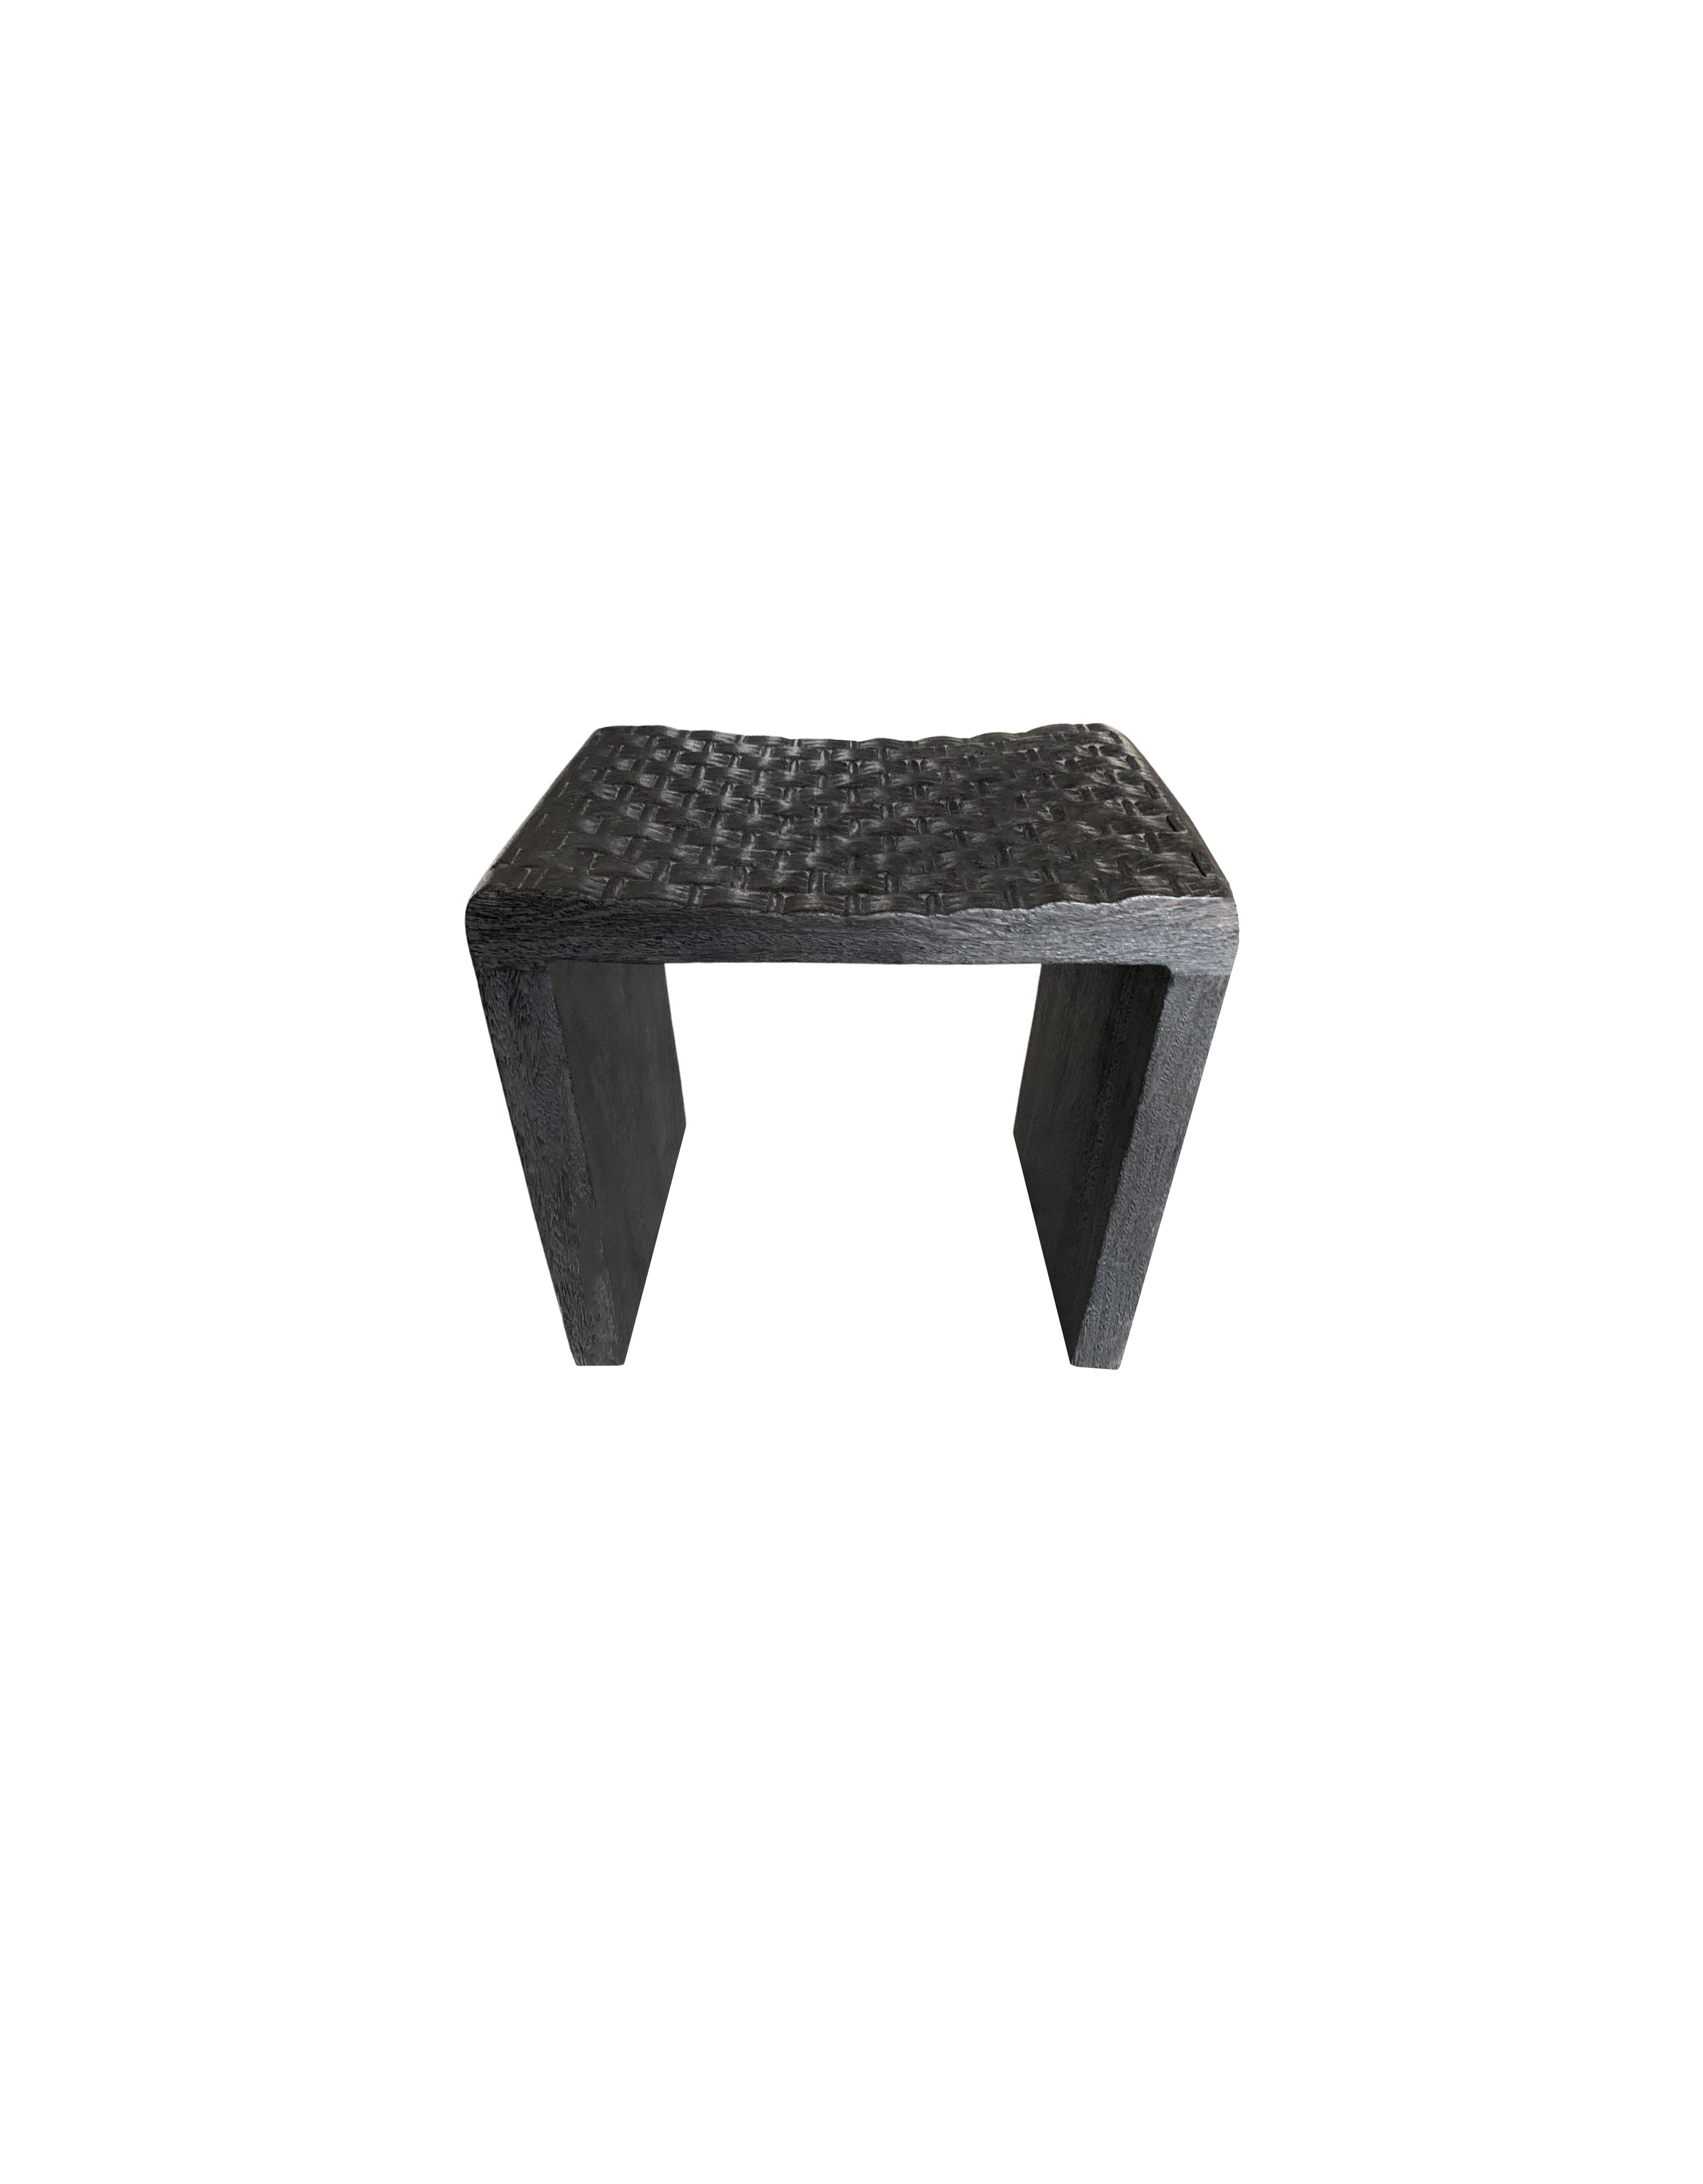 Hand-Crafted Sculptural Mango Wood Stool with Carved Detailing & Burnt Finish Modern Organic For Sale